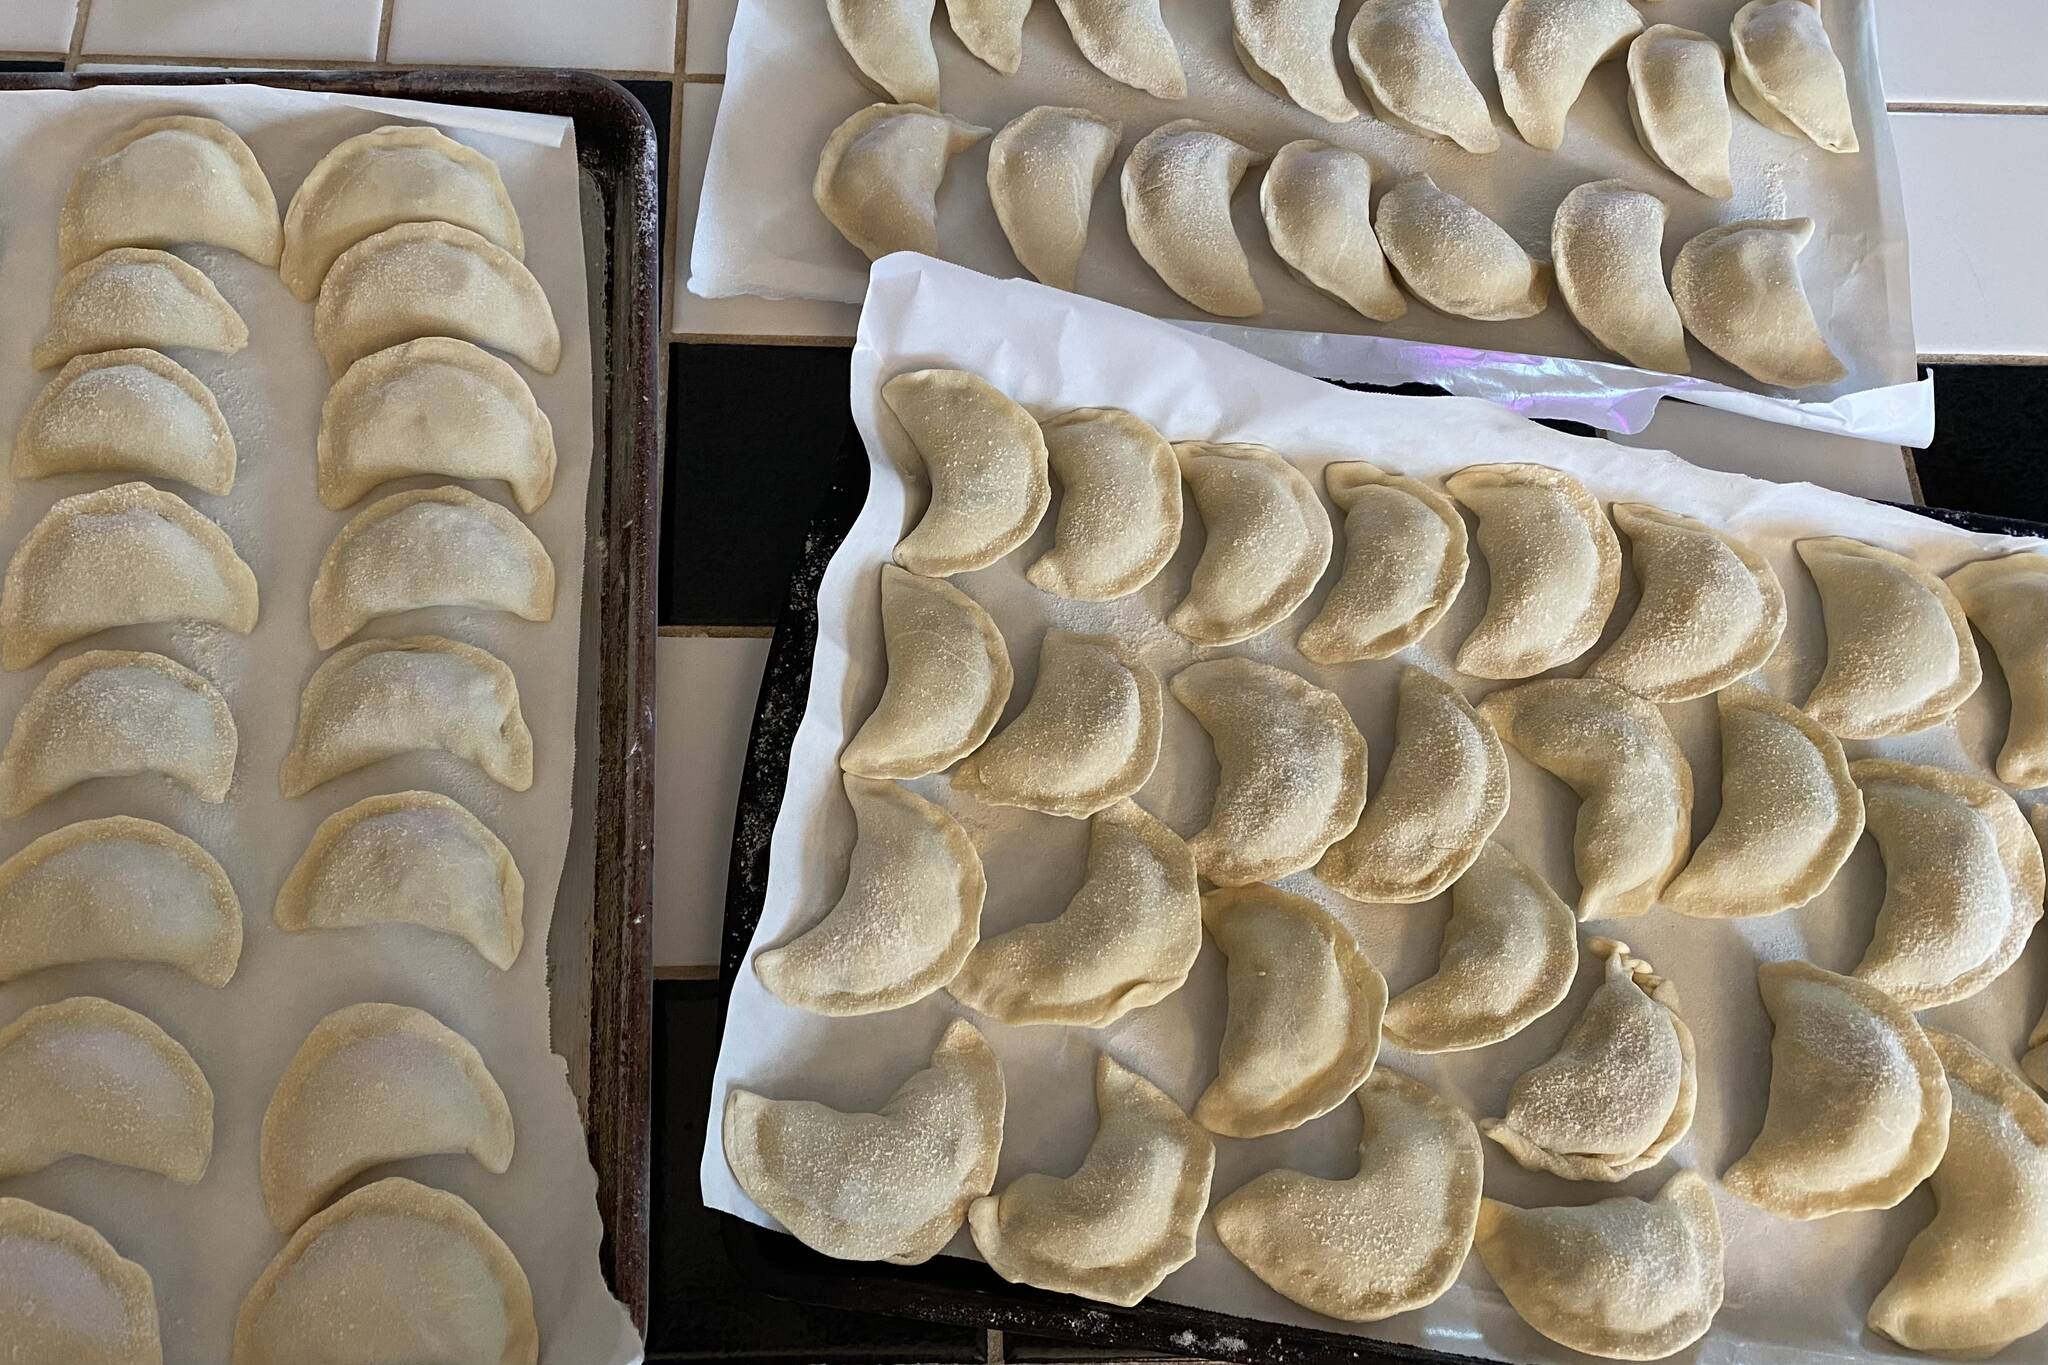 Dozens of Ukranian dumplings, called varenyky, sit after being prepared for a benefit dinner and silent auction to benefit children in war-torn Ukraine on Friday, March 25, 2022. (Courtesy photo / Olena Zyuba)